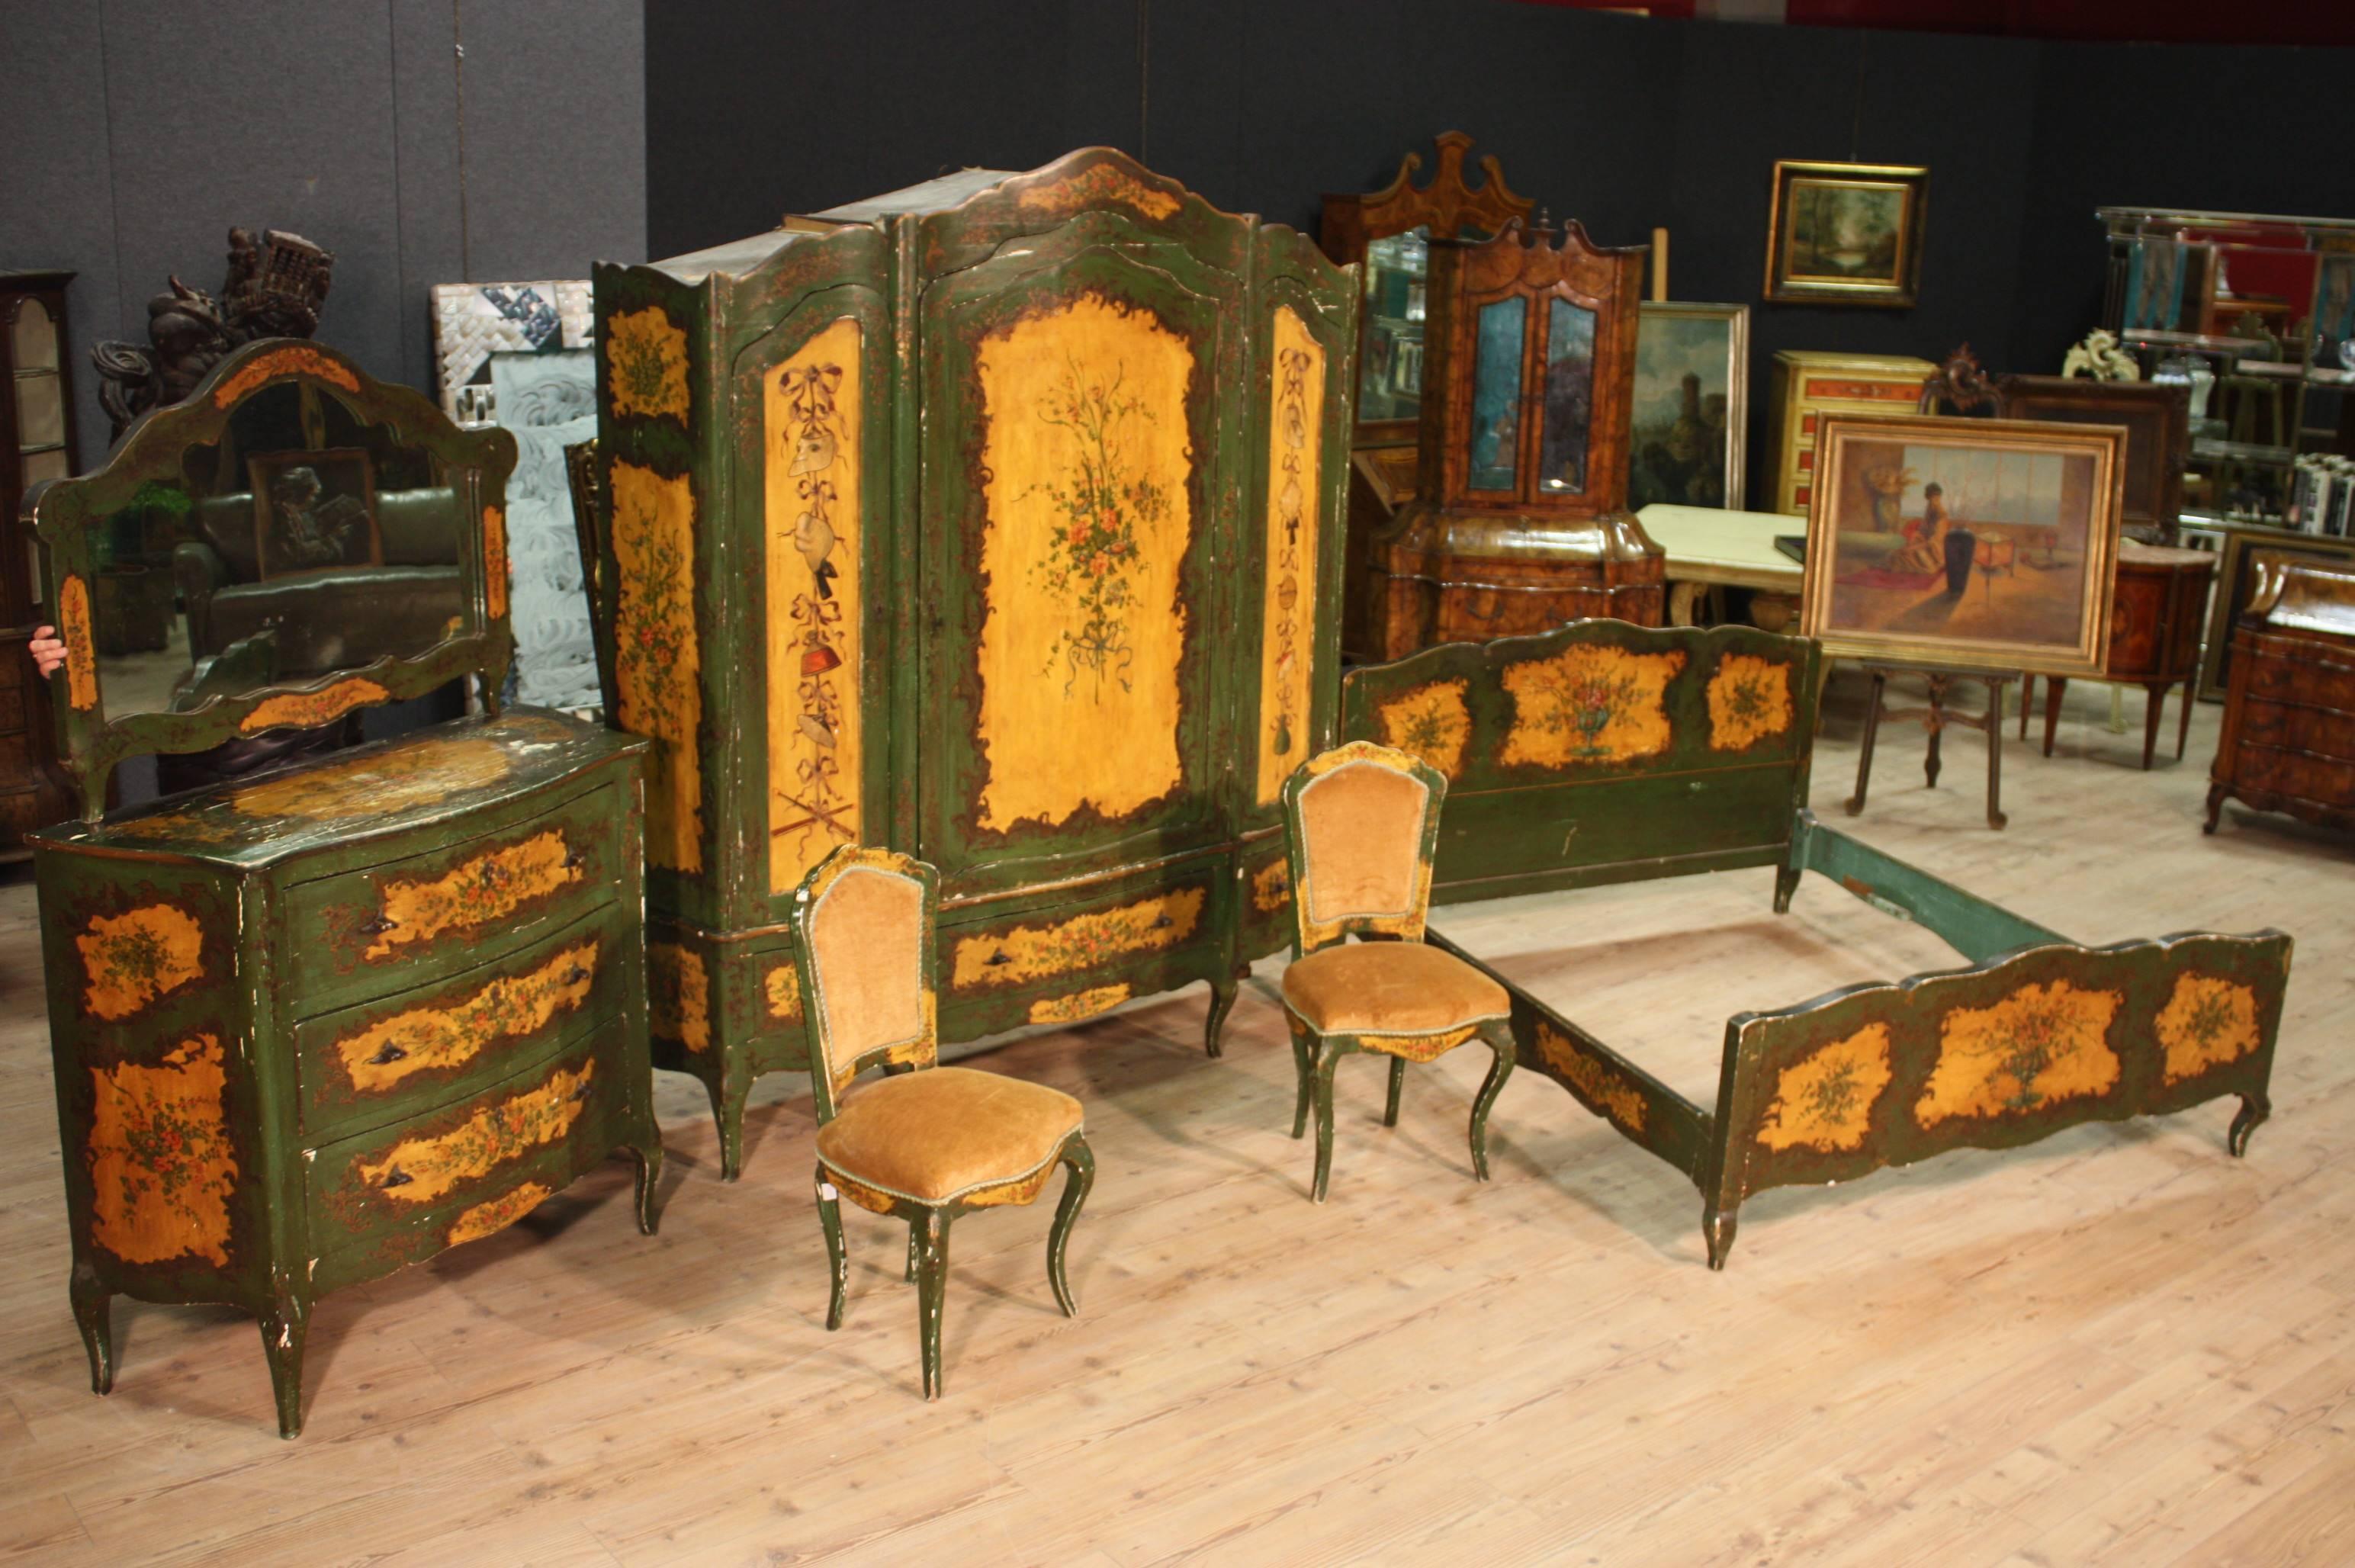 Scenic Venetian bed of the 20th century. Furniture made by ornately carved, lacquered, gilded and painted wood with floral motifs of great taste and enjoyment. Double bed of great extent and impact. Internal dimensions: W 159 x D 195 cm. Furniture